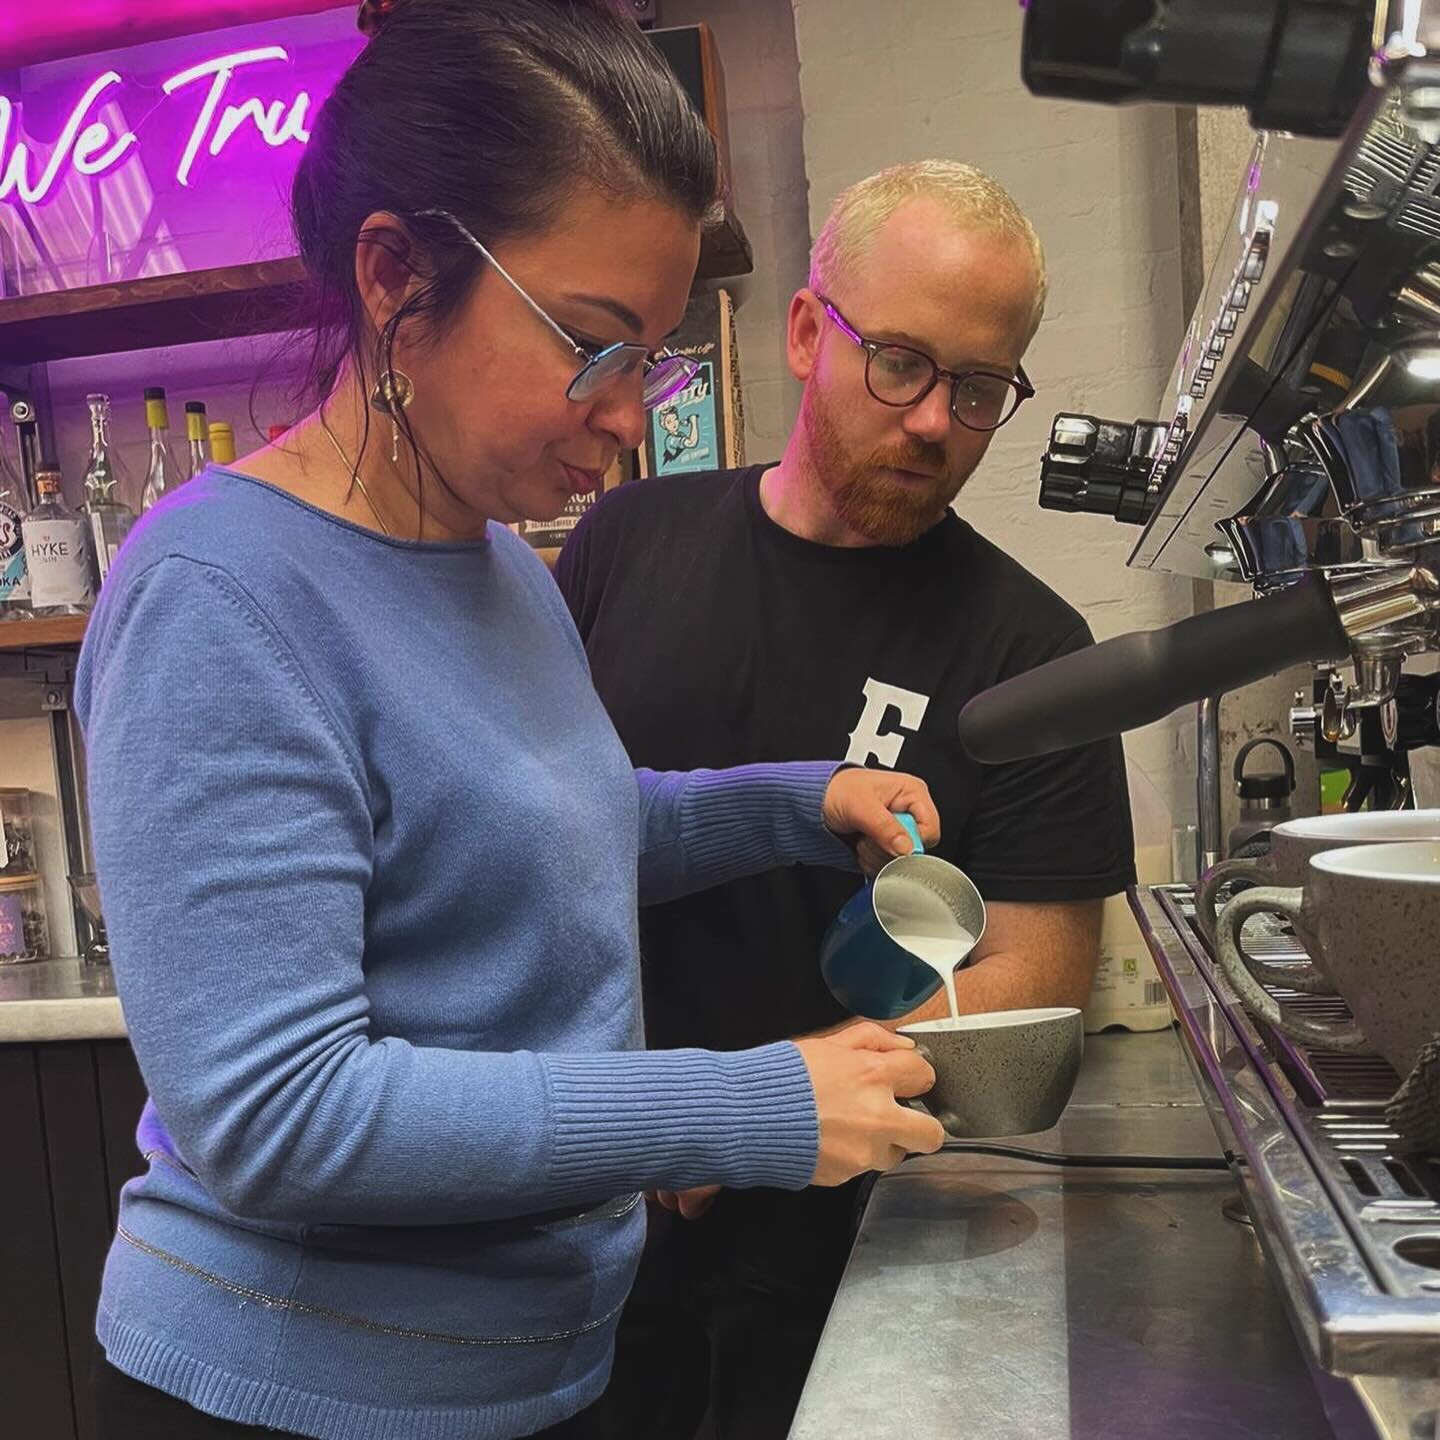 Thanks to the expert team @extractcoffee - Hayden, Laura and Szilard - for delivering excellent barista training for Cohort 18 ☕️ 💥

Learning about the whole process from bean to cup (and the all-important mastering of latte art!) gives our students